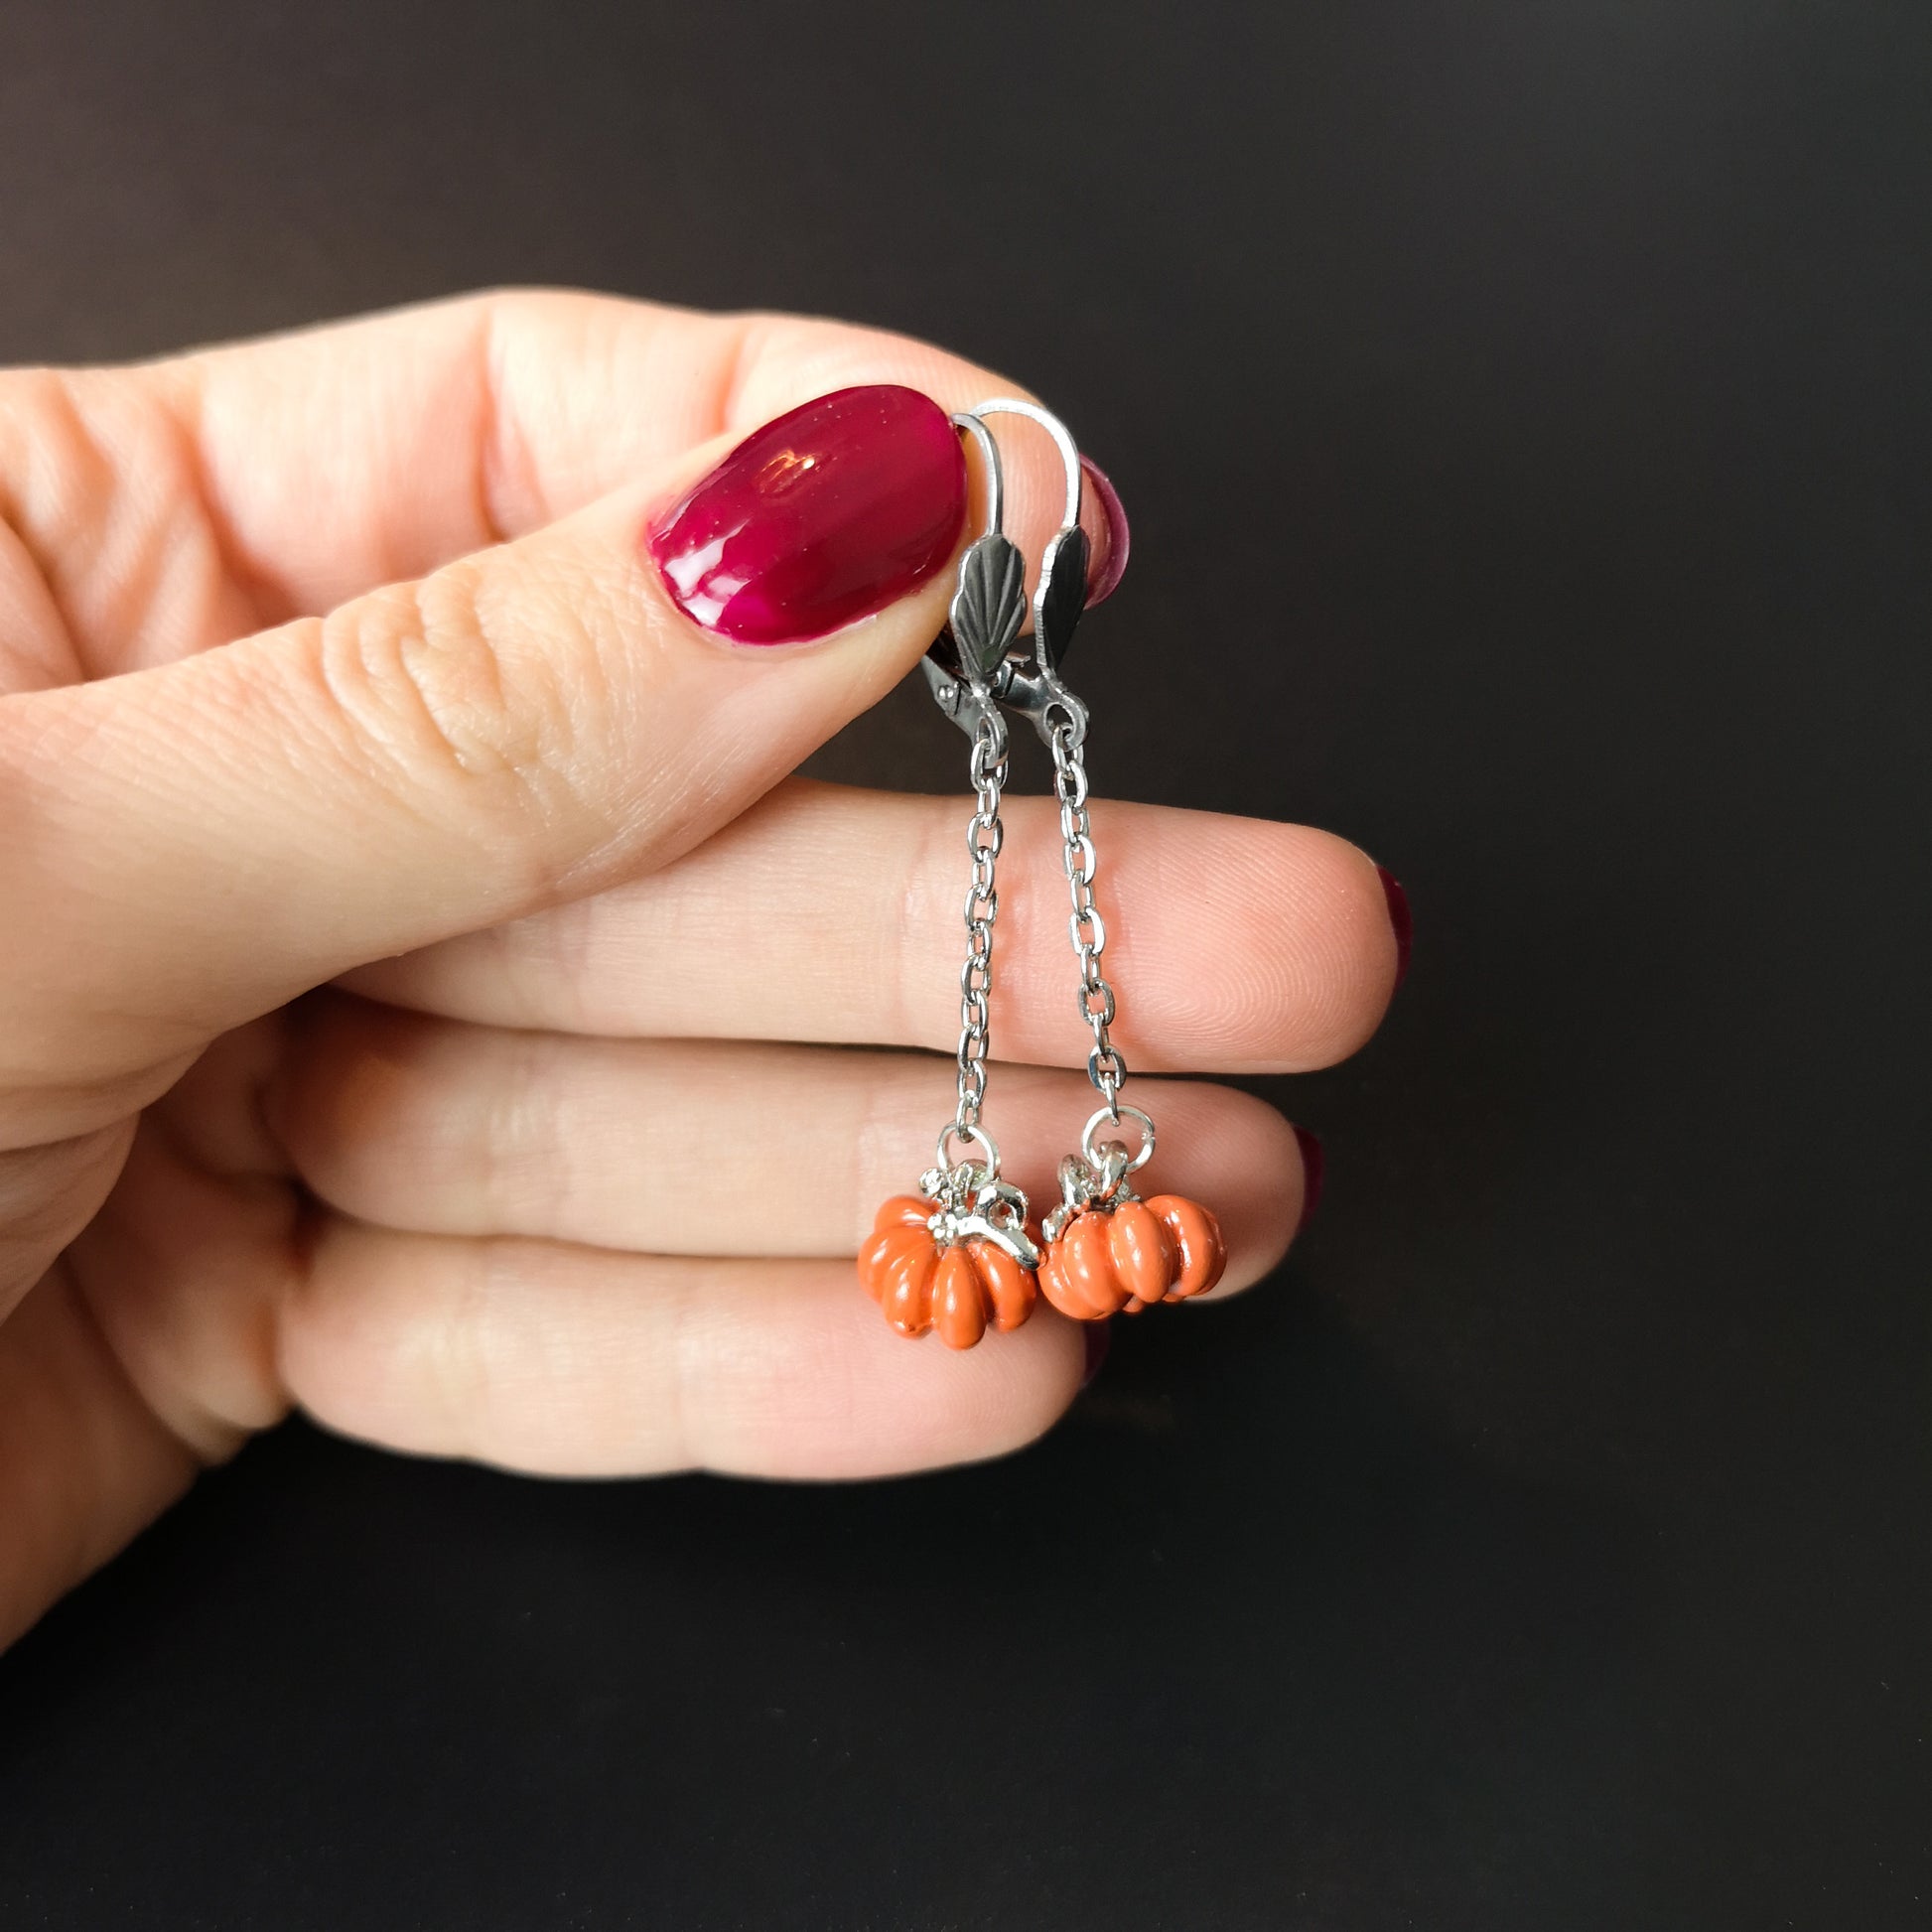 Adorable tiny pumpkins Halloween earrings - The French Witch shop